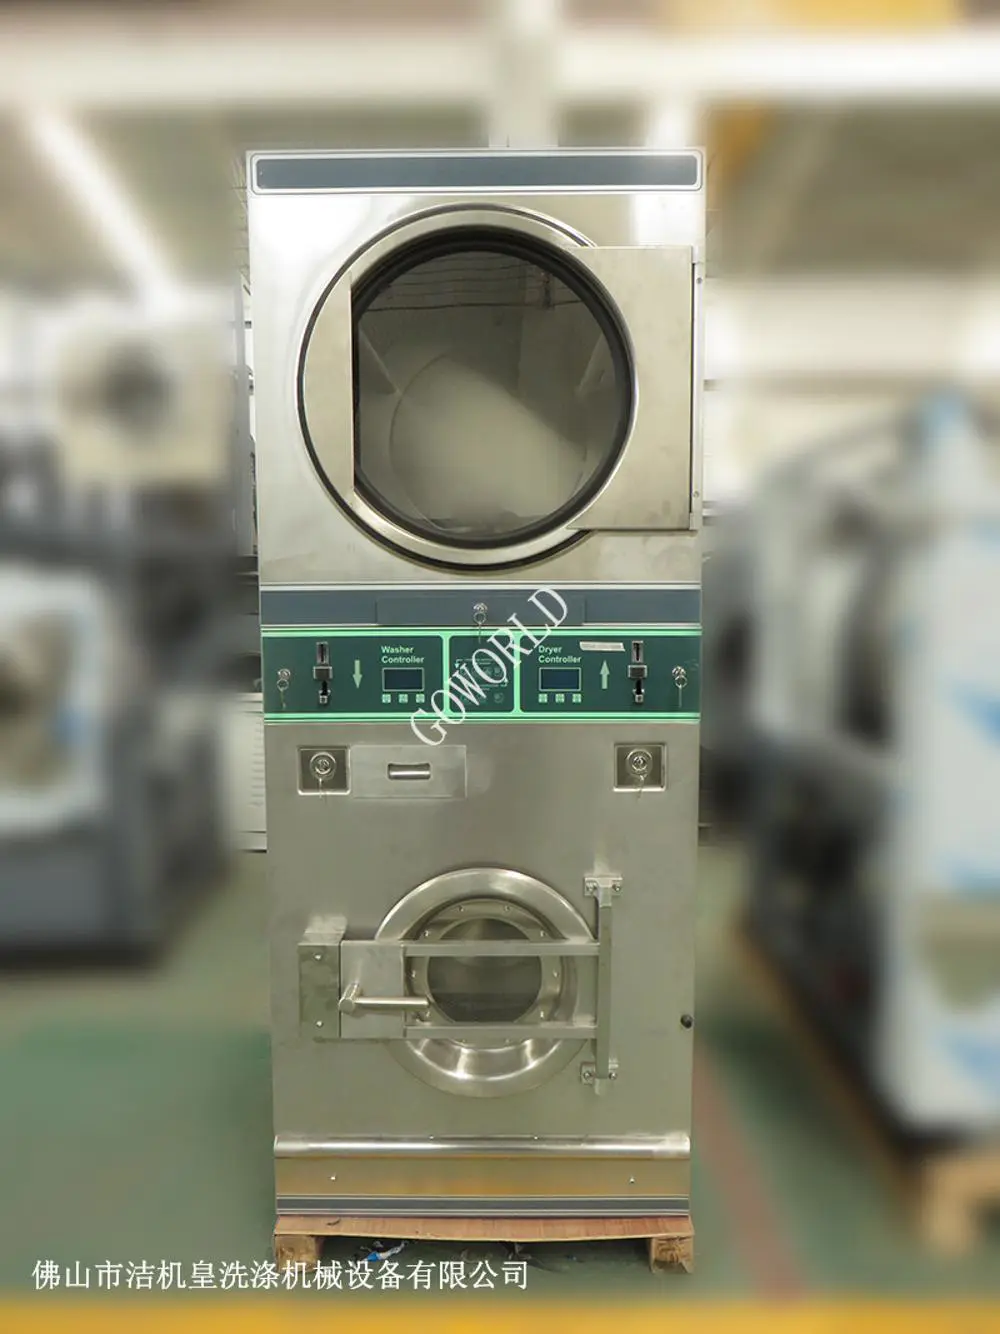 12+12kg stack washer dryer machine for laundromat